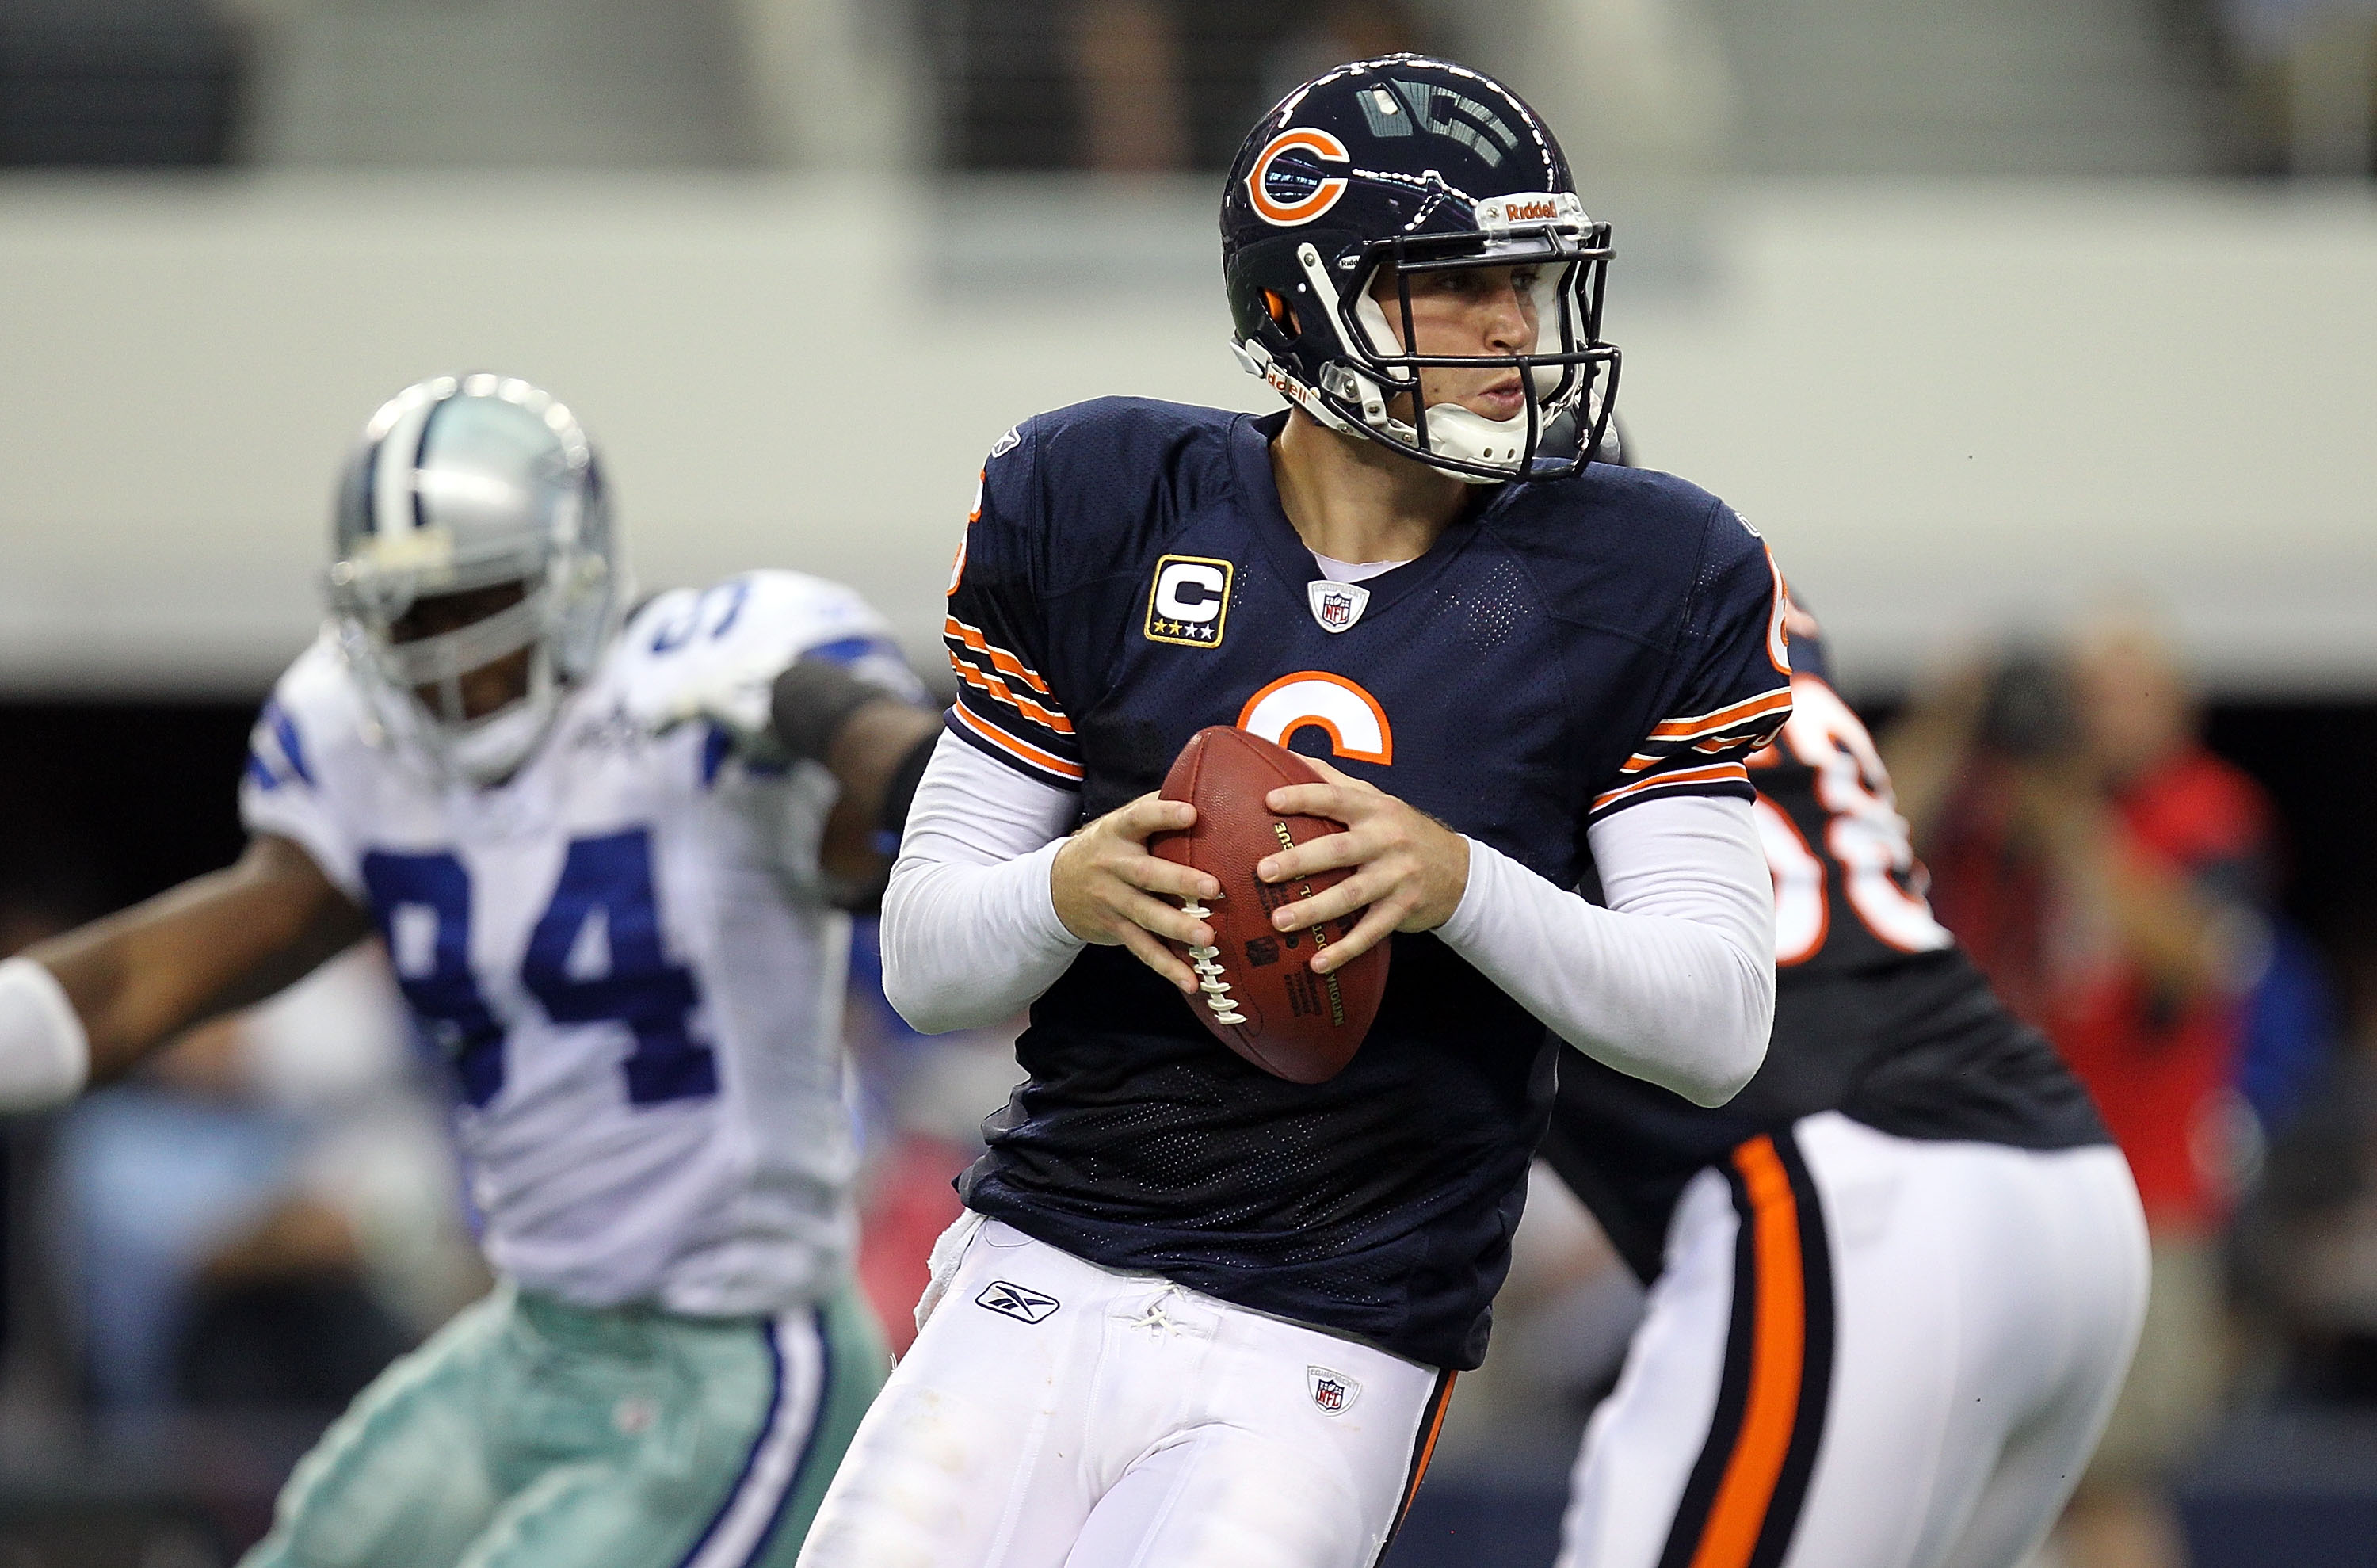 ARLINGTON, TX - SEPTEMBER 19:  Quarterback Jay Cutler #6 of the Chicago Bears looks to pass against the Dallas Cowboys at Cowboys Stadium on September 19, 2010 in Arlington, Texas.  (Photo by Ronald Martinez/Getty Images)